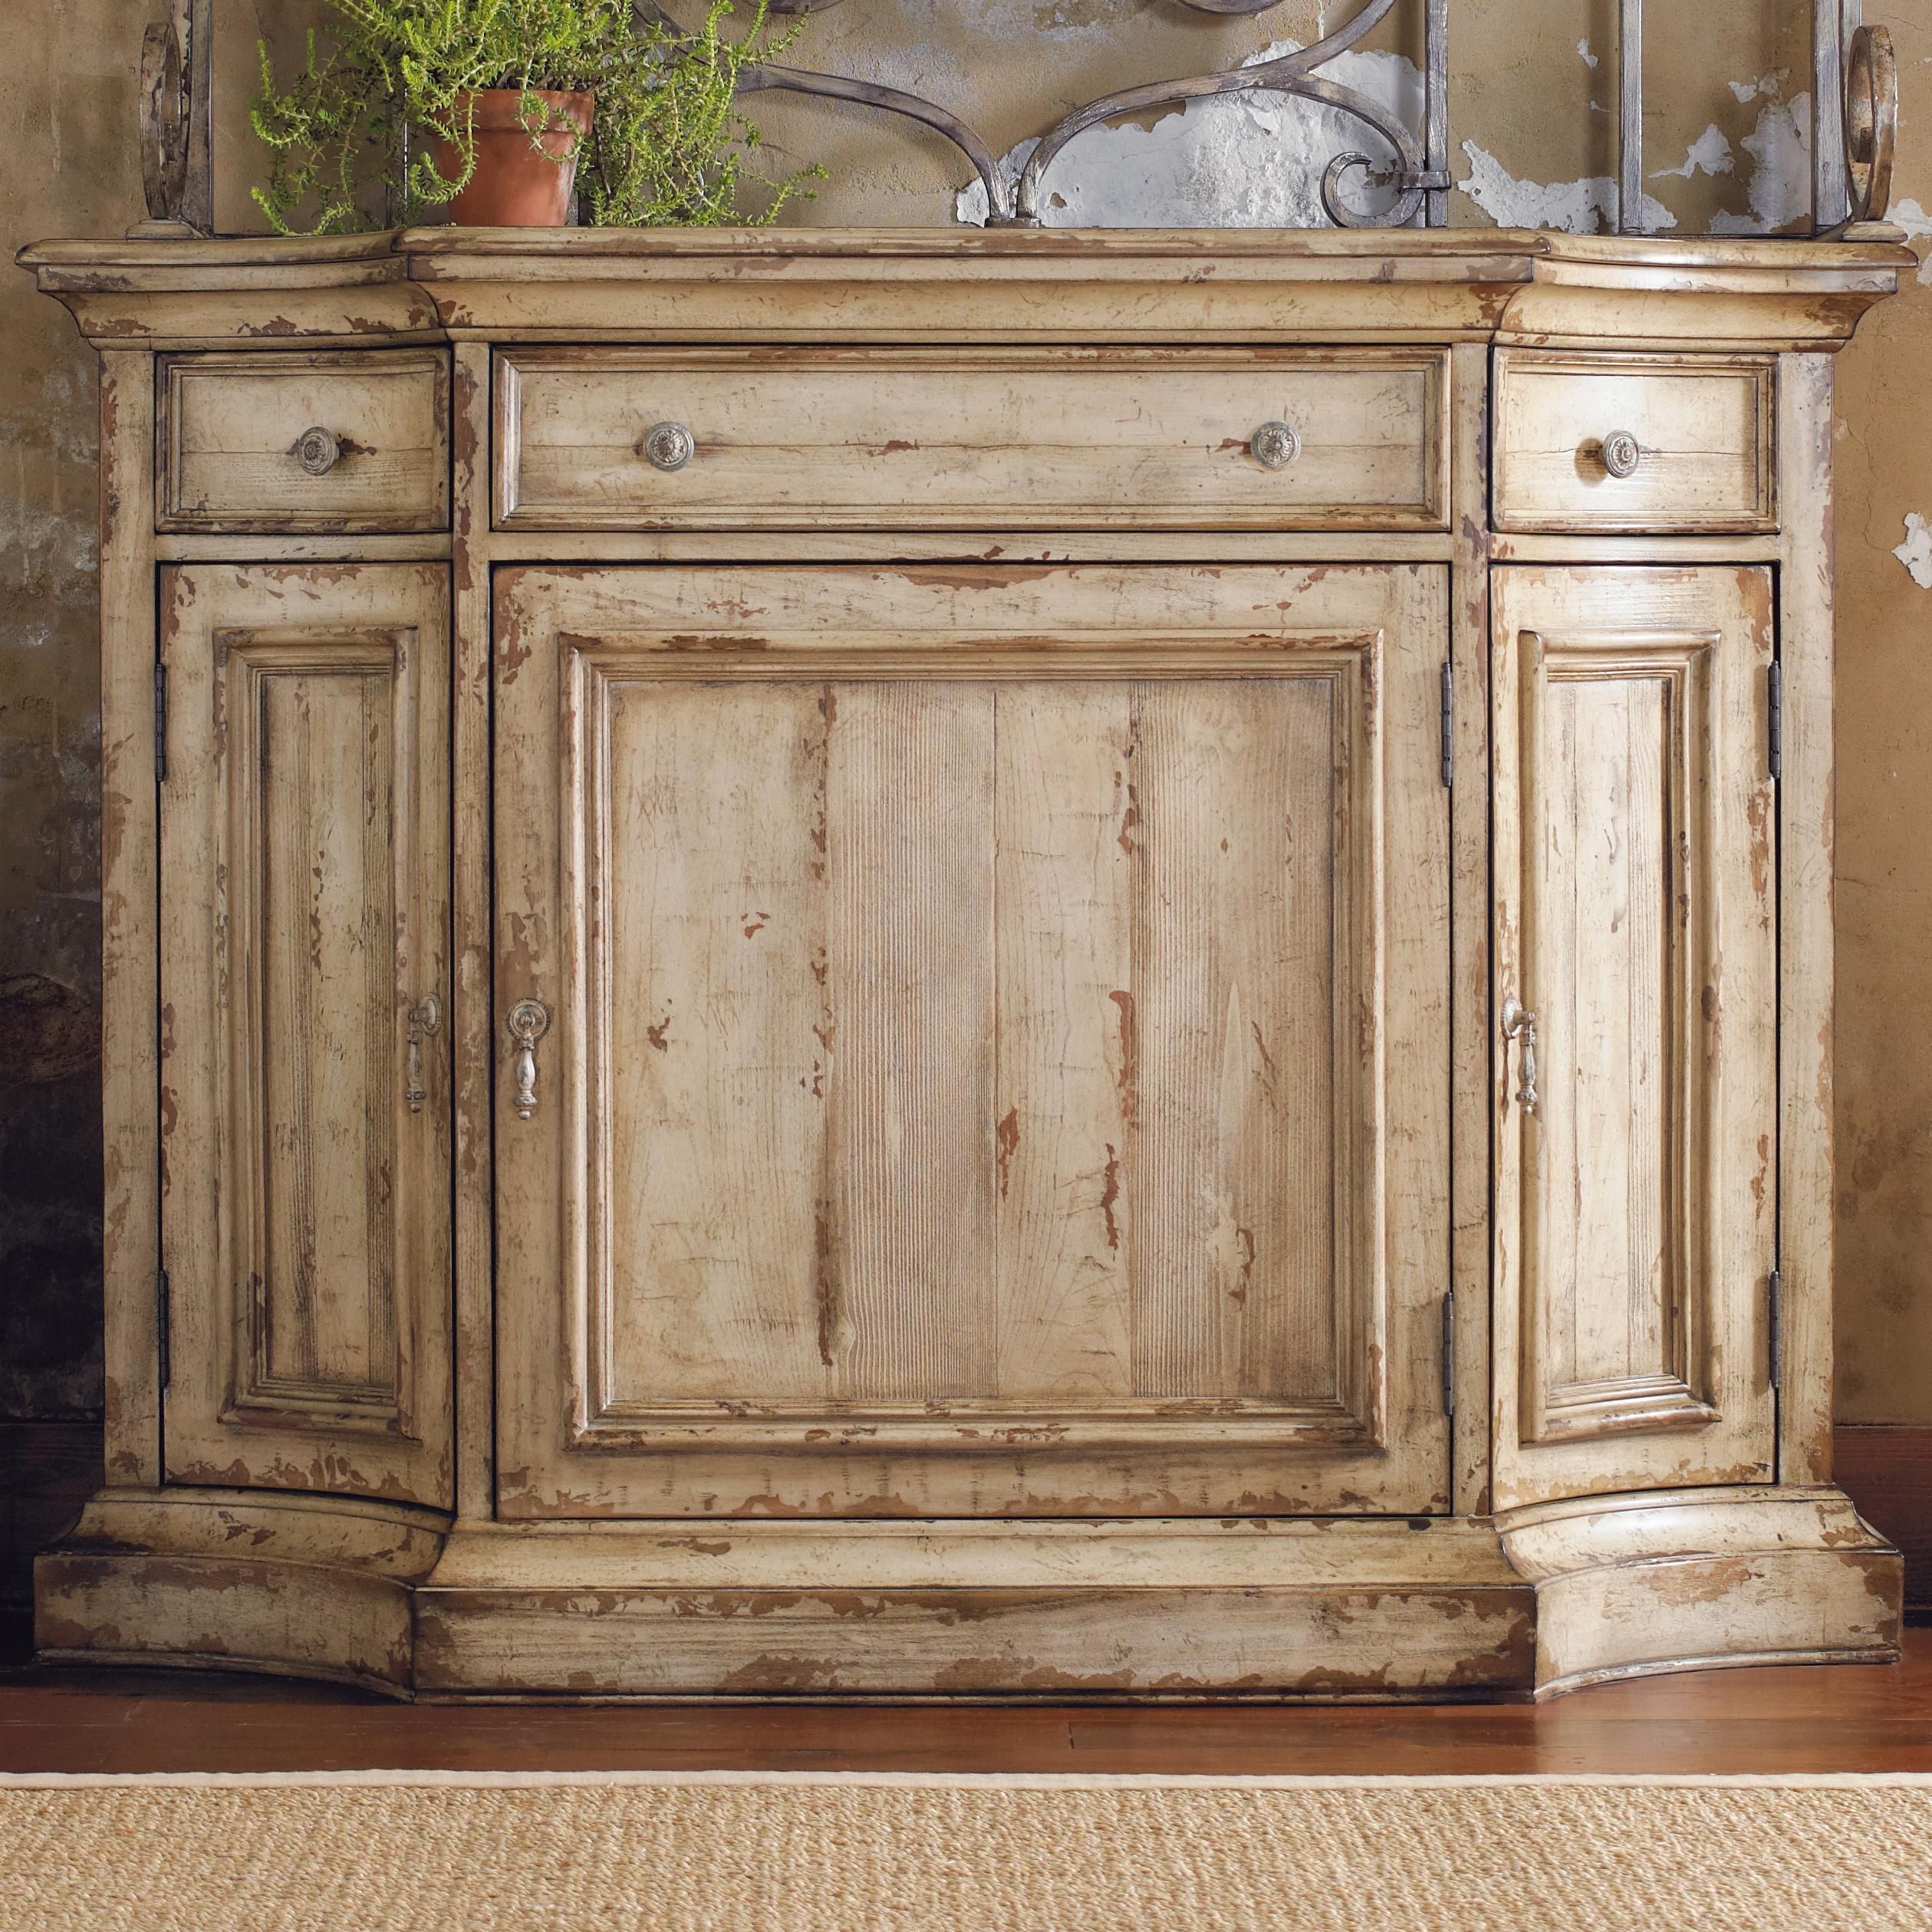 Pin On Painted Furniture And Cabinets In Hayslett Sideboards (View 11 of 30)